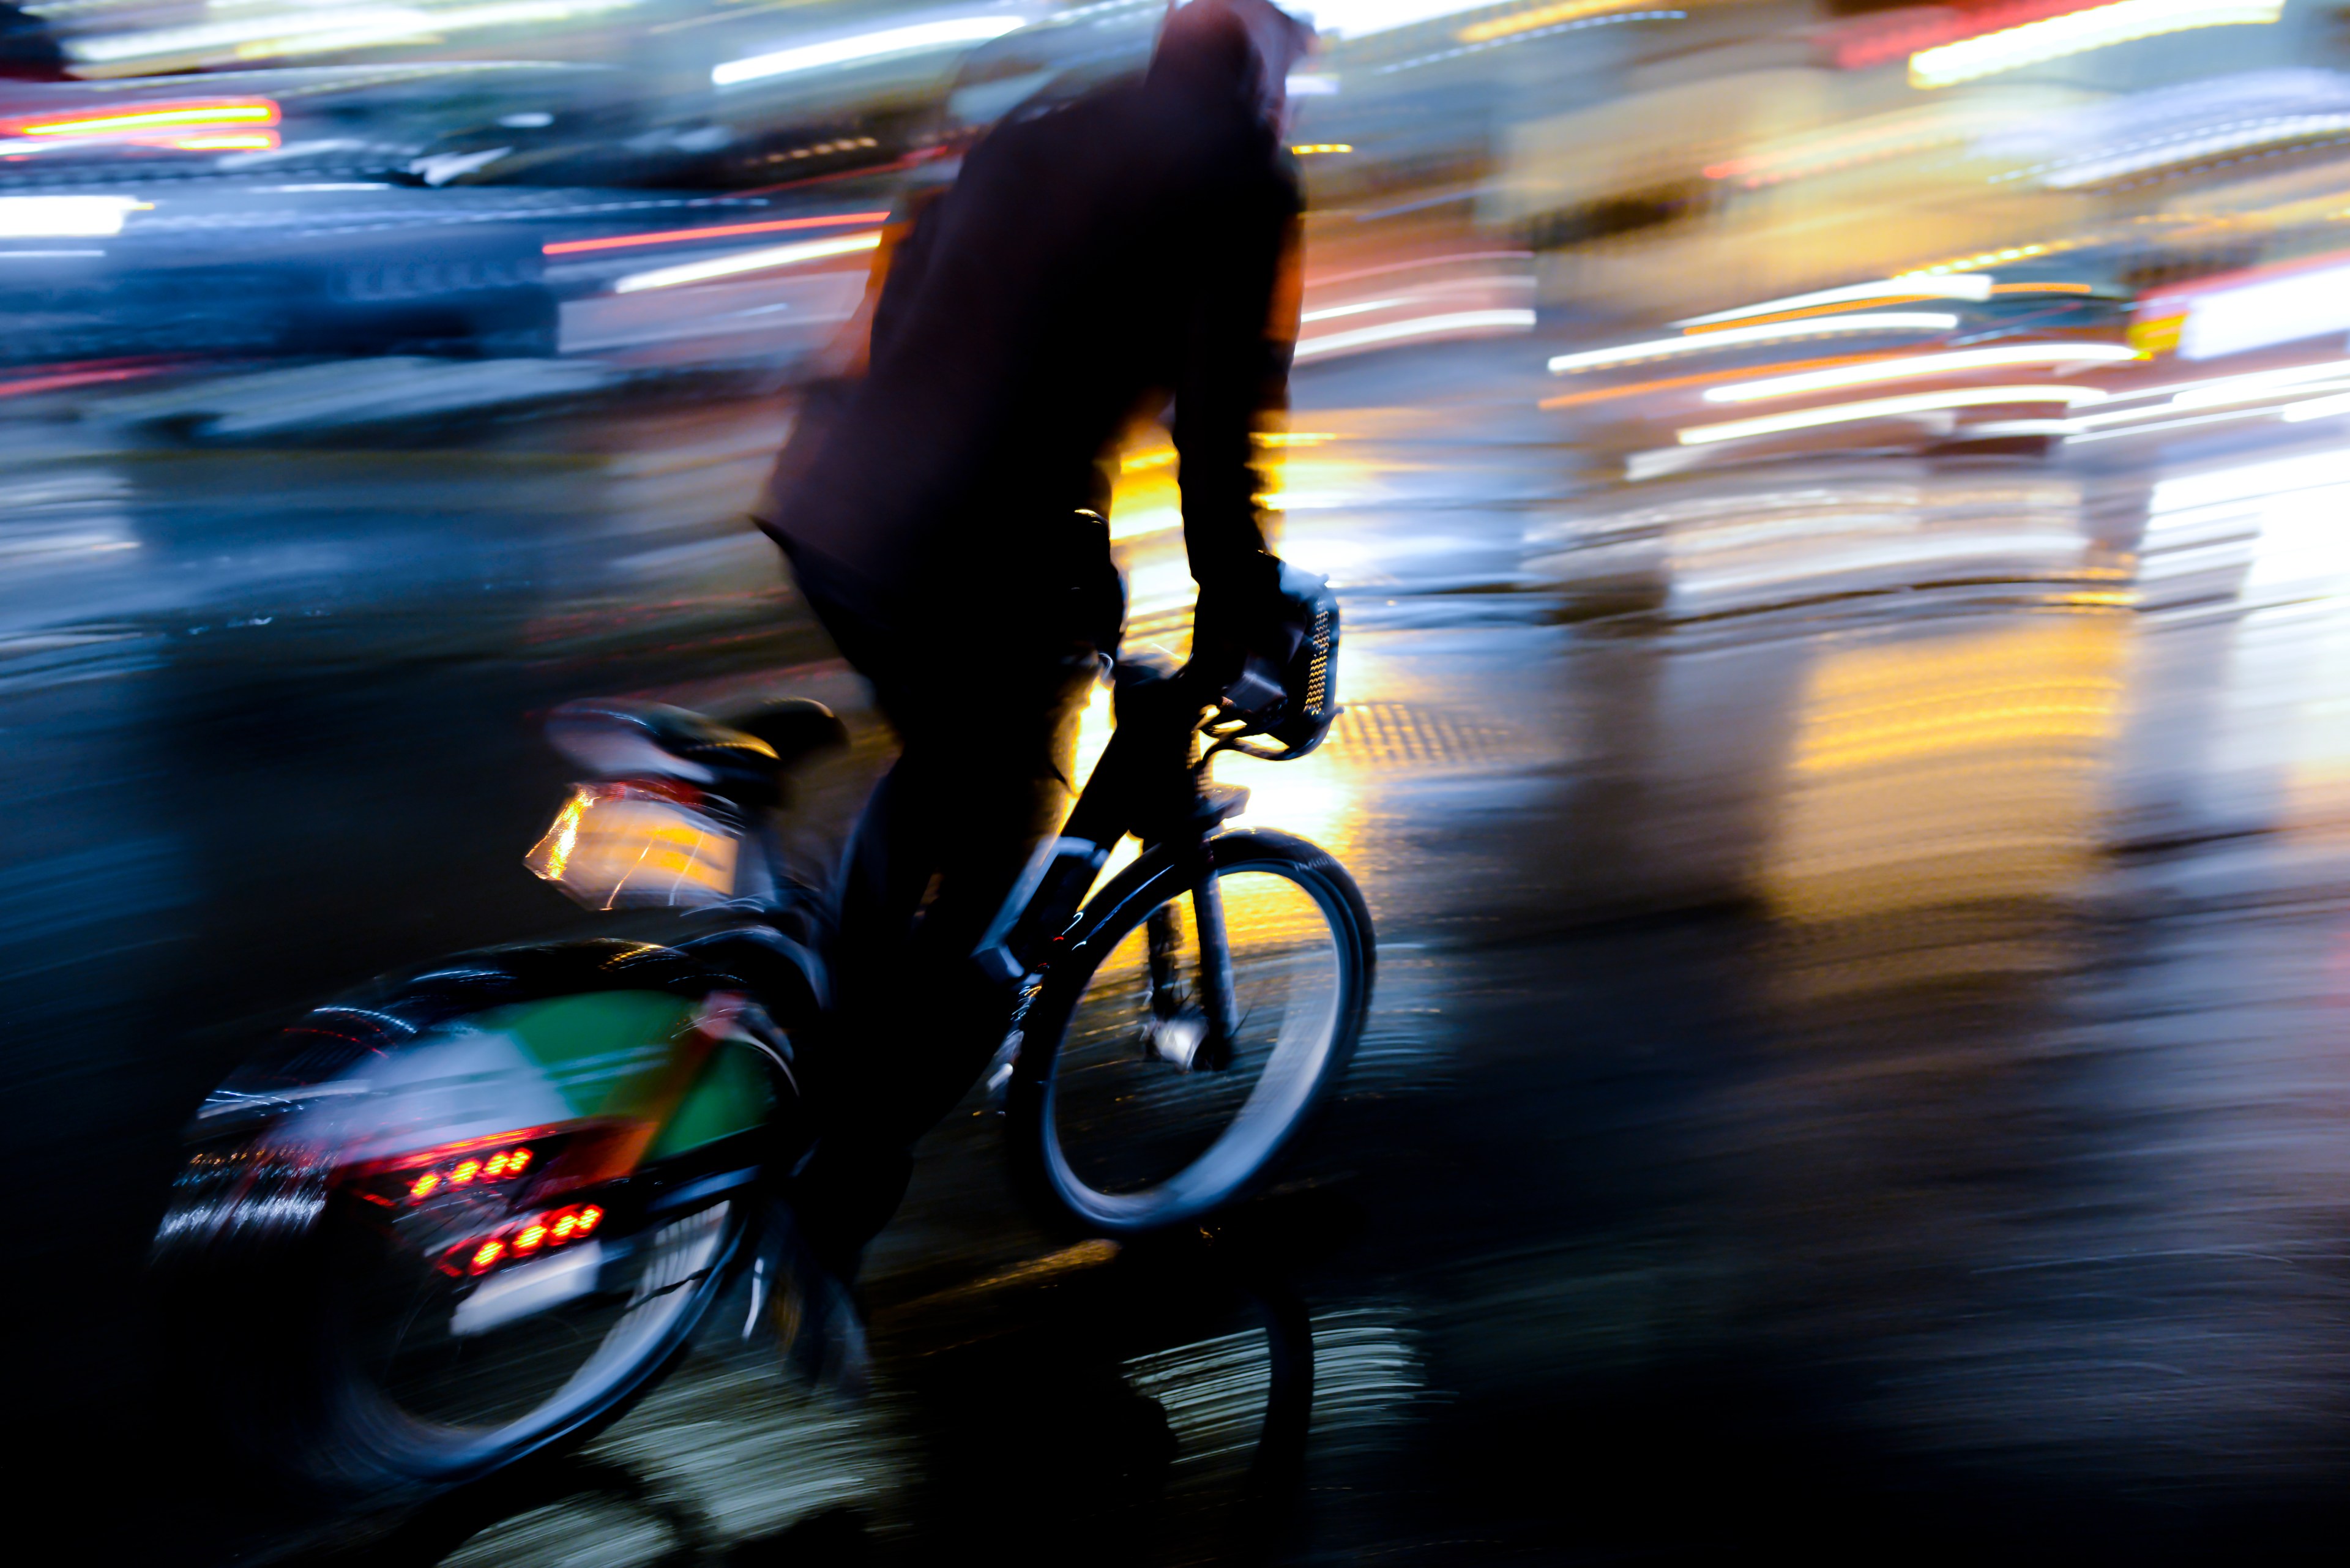 A man cycling in blurred motion